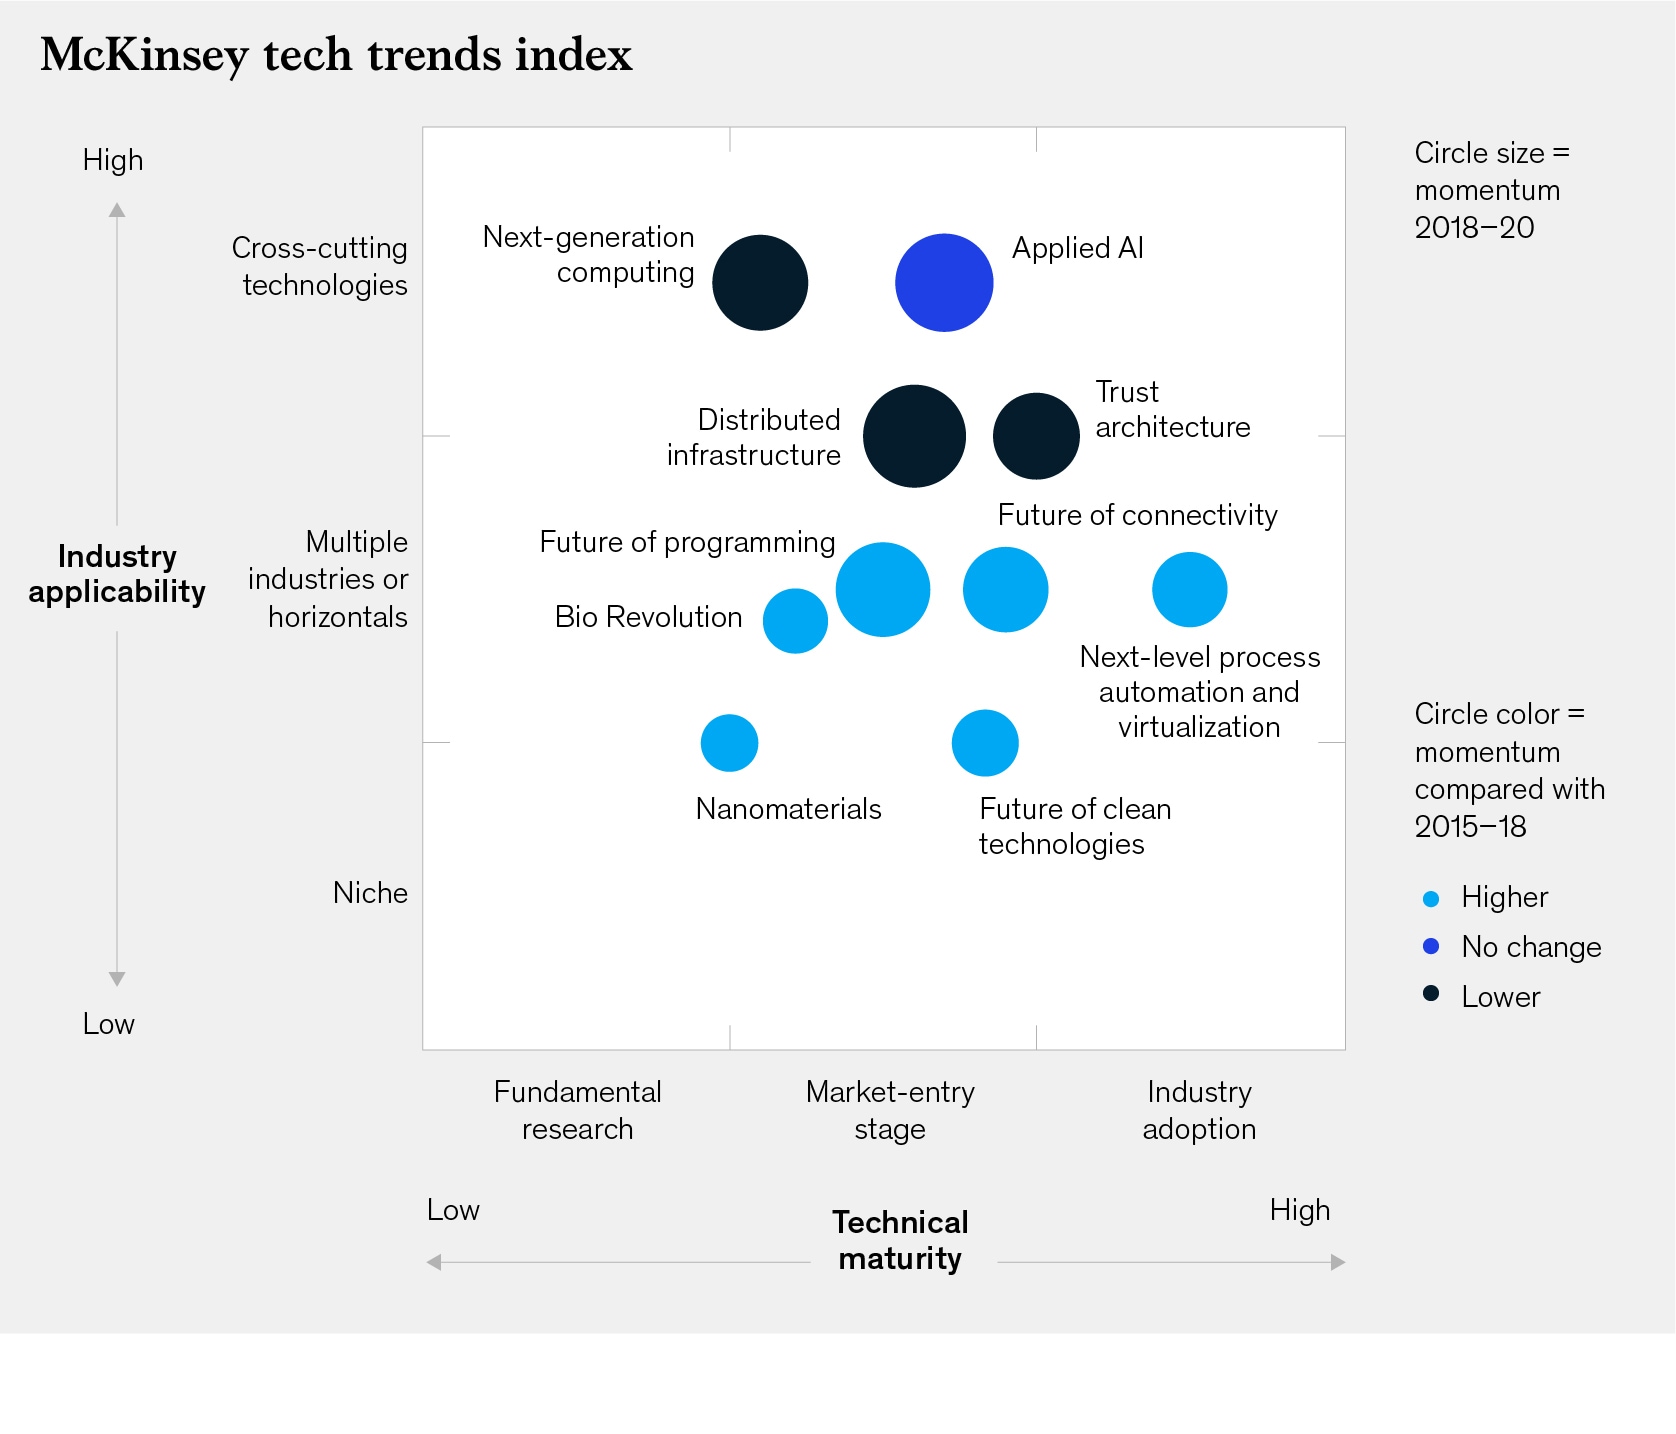 A new McKinsey council identifies today’s top tech trends for business leaders McKinsey & Company